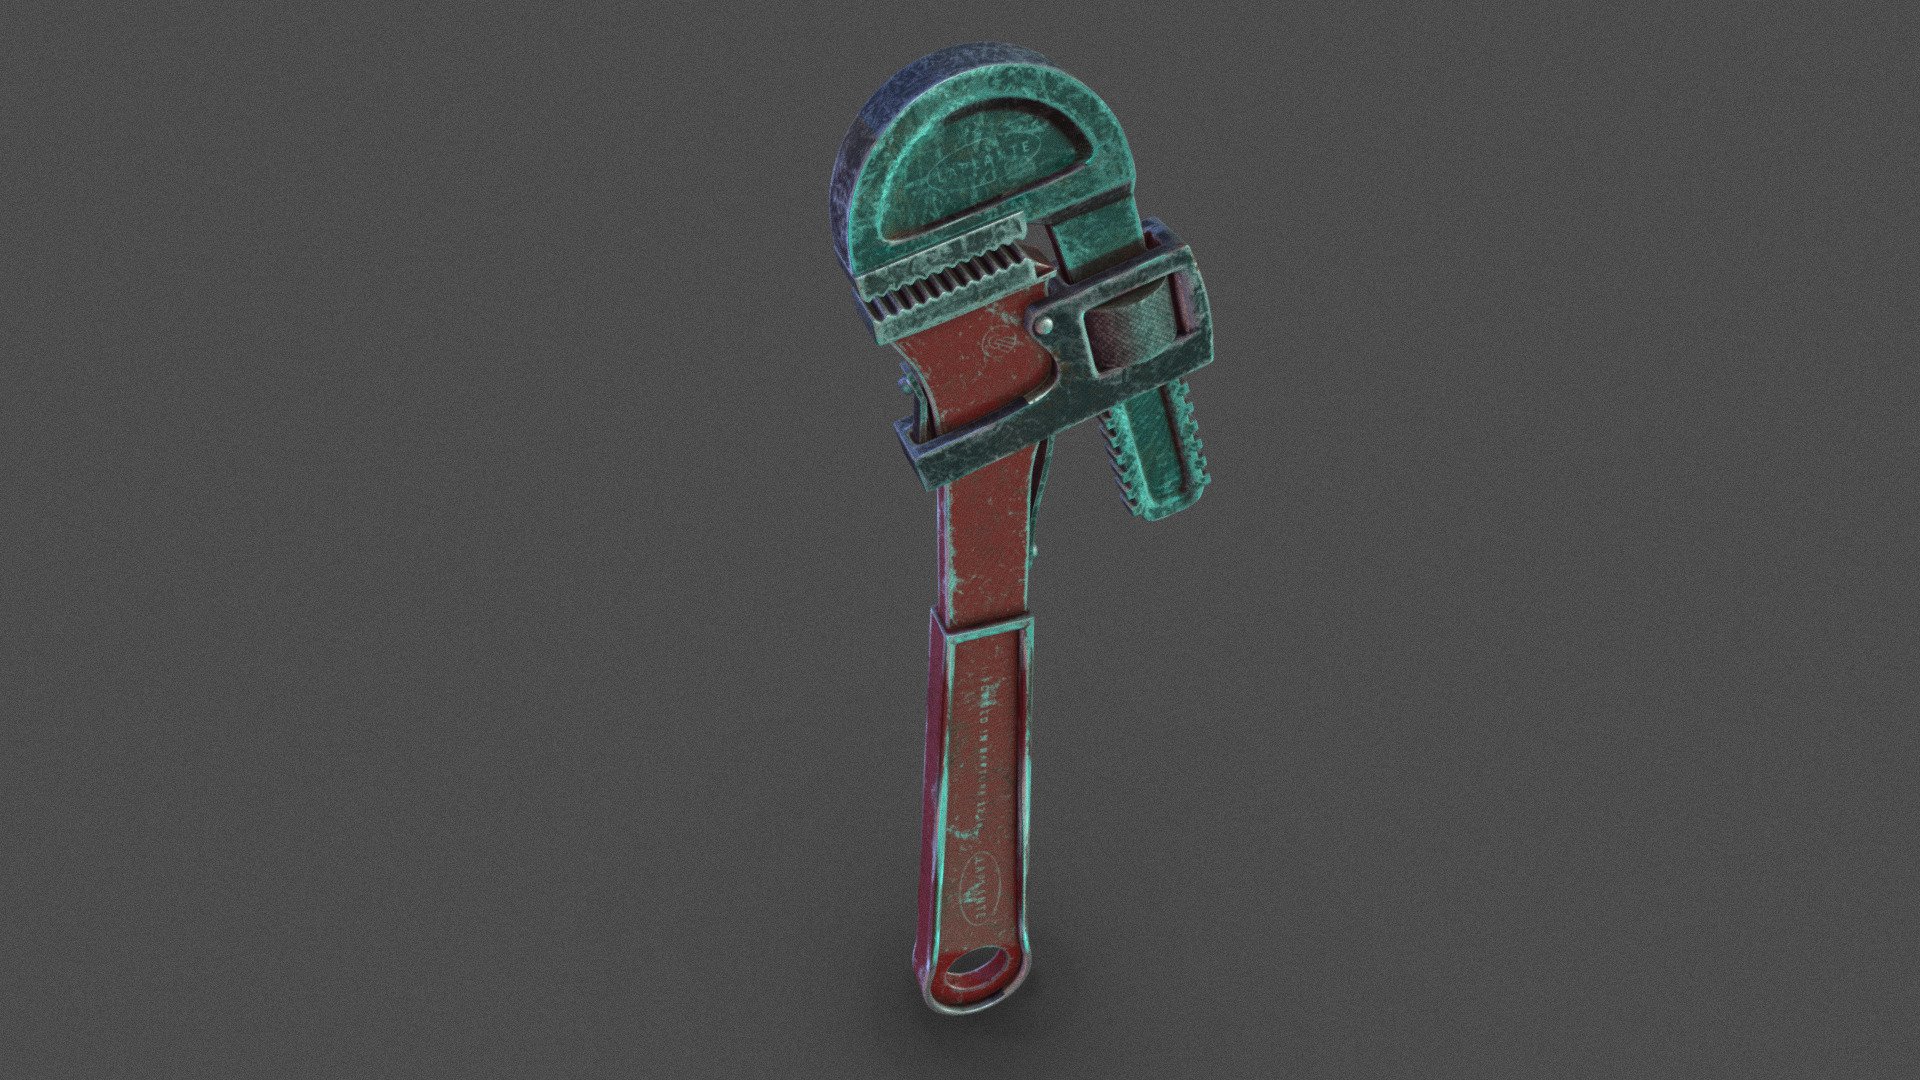 Fan model of the Wrench from Bioshock

Made for a new series I'm working on. More info on that at a later date.

Renders at my Artstation here 

Modeled in Maya
Textured in Substance painter - WRENCH - 3D model by Stephen Makes A Thing (@StephenMakesAThing) 3d model